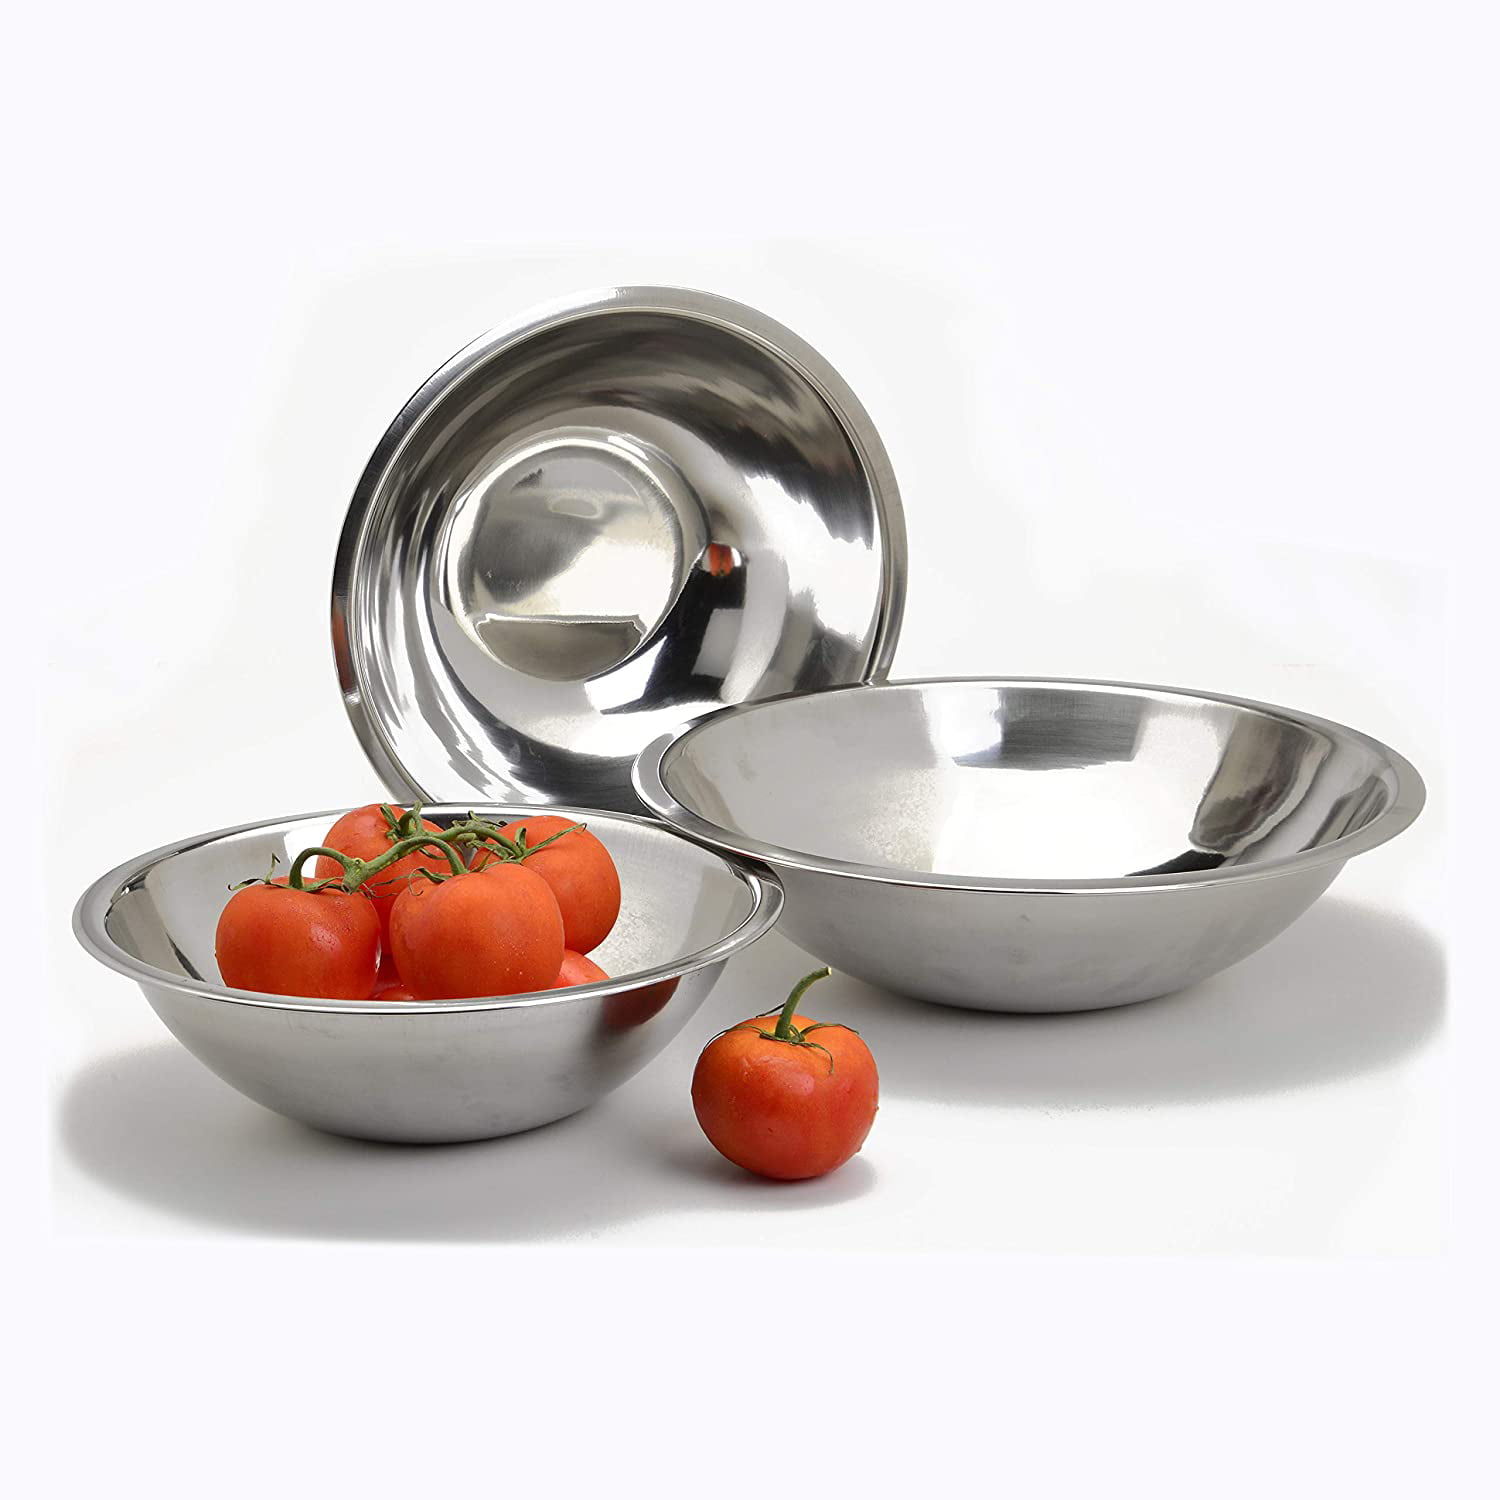 1.5 Qt. Stainless Steel Mixing Bowl – Richard's Kitchen Store